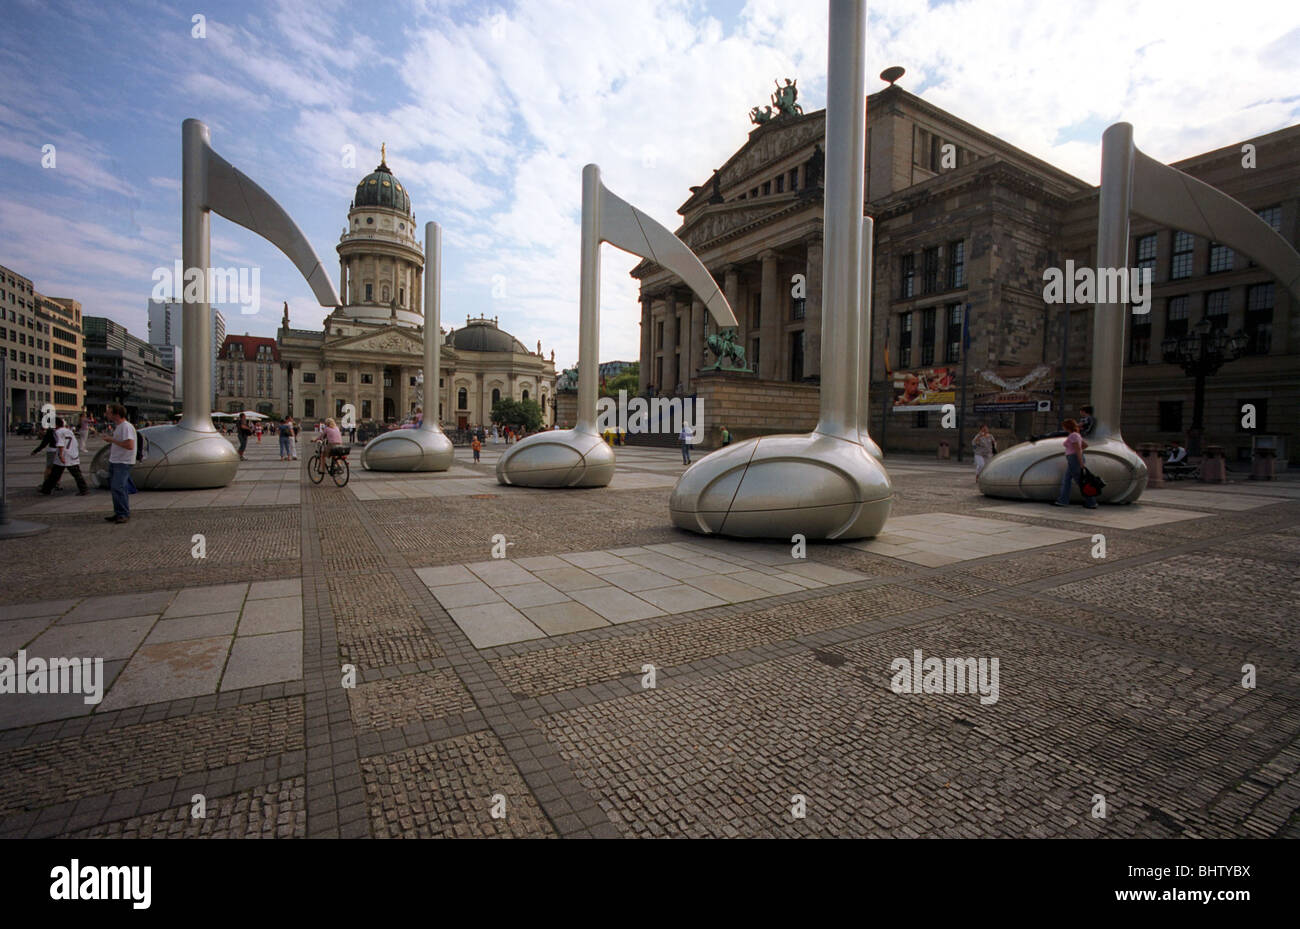 The sculpture Masterpieces of Music on the Gendarmenmarkt Square in Berlin, Germany Stock Photo